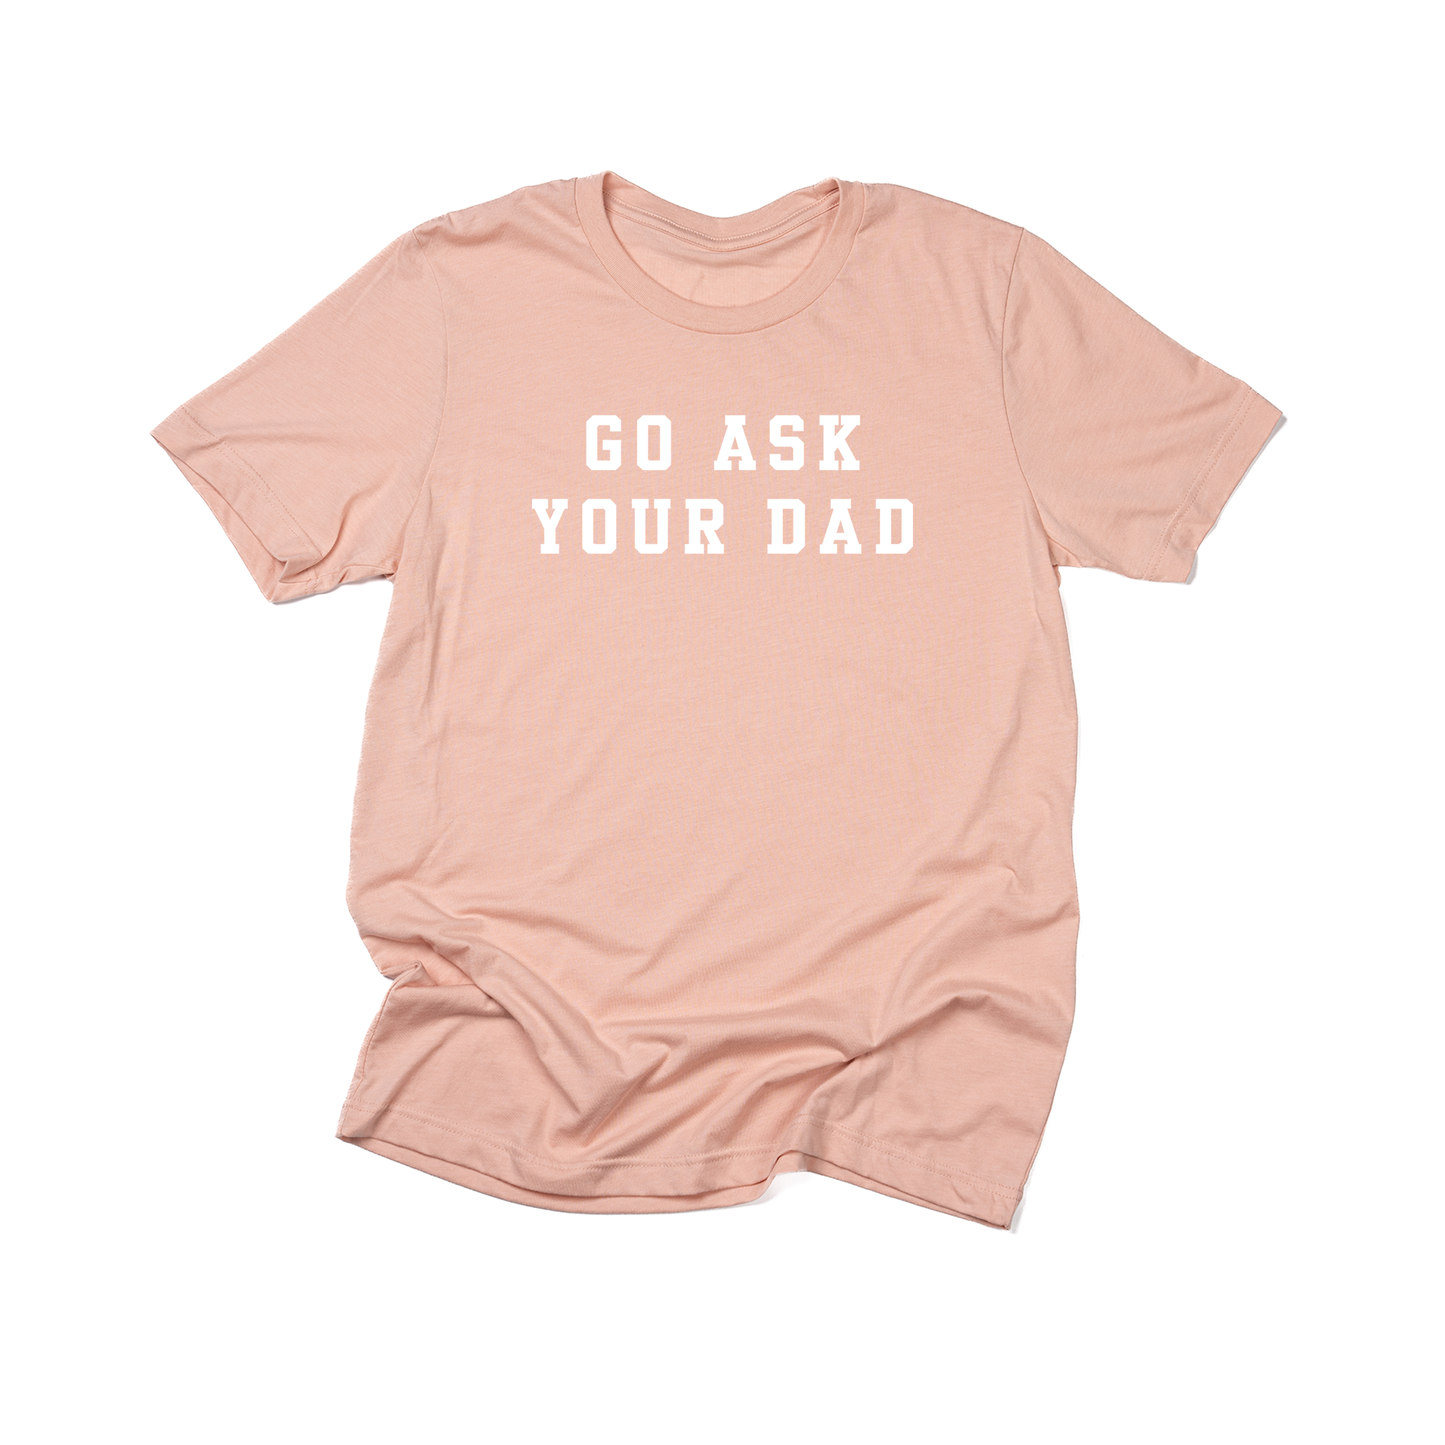 Go Ask Your Dad (White) - Tee (Peach)